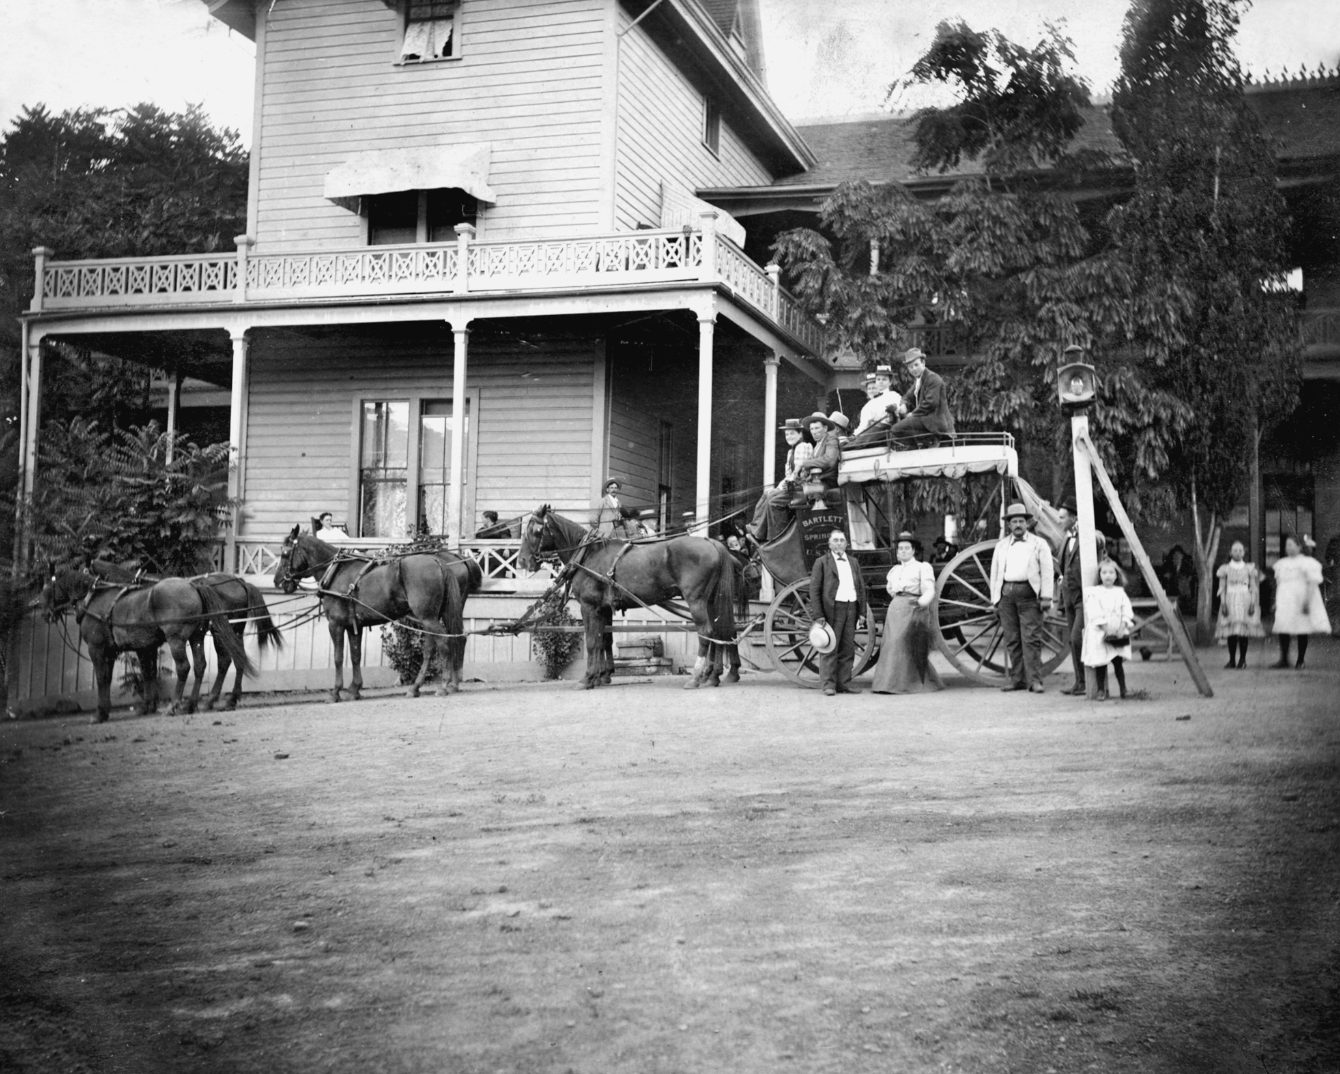 The Vignolo Hotel in Berenda, just a few miles north of Madera, was a major stagecoach stop. It was also the scene of a bold robbery in 1901.